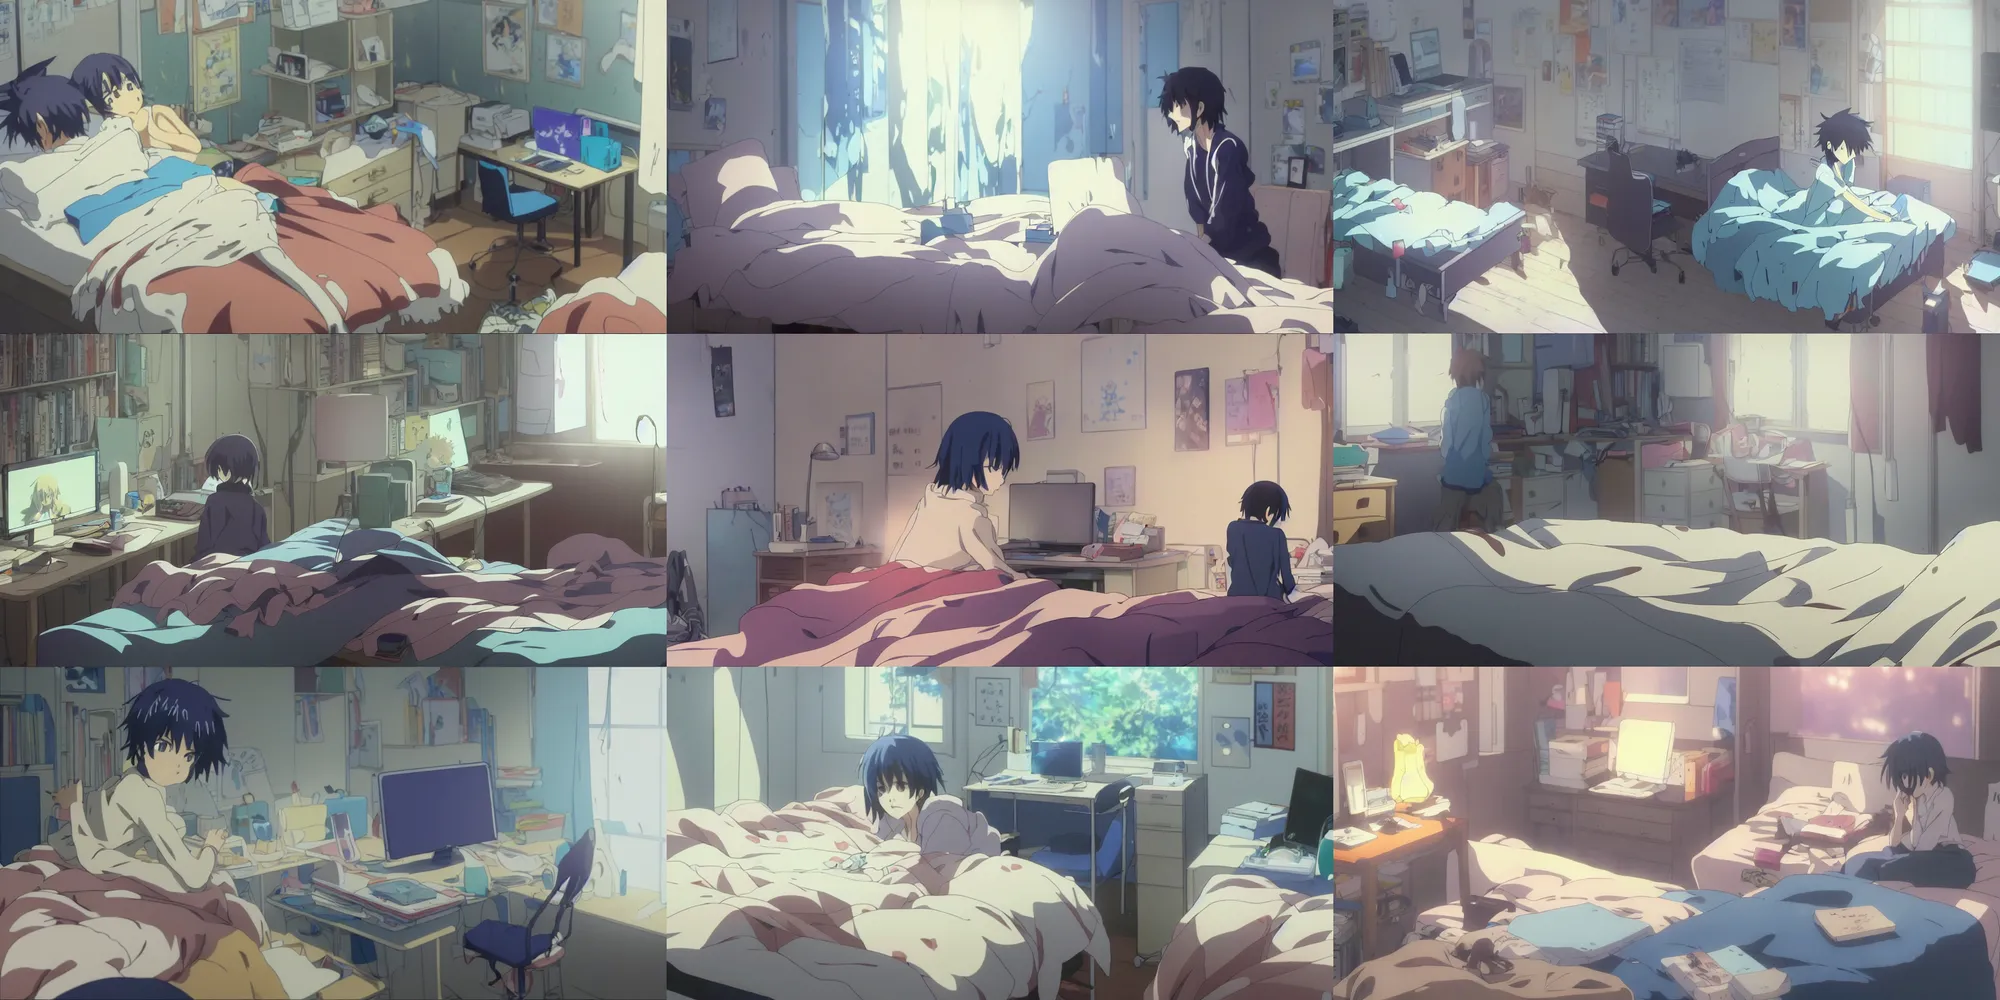 Prompt: an intimate close up of the anime main character's bedroom in the anime film by makoto shinkai; a computer desk, (books), messy clothes, anime lover, posters, toys, screenshot from the makoto shinkai anime